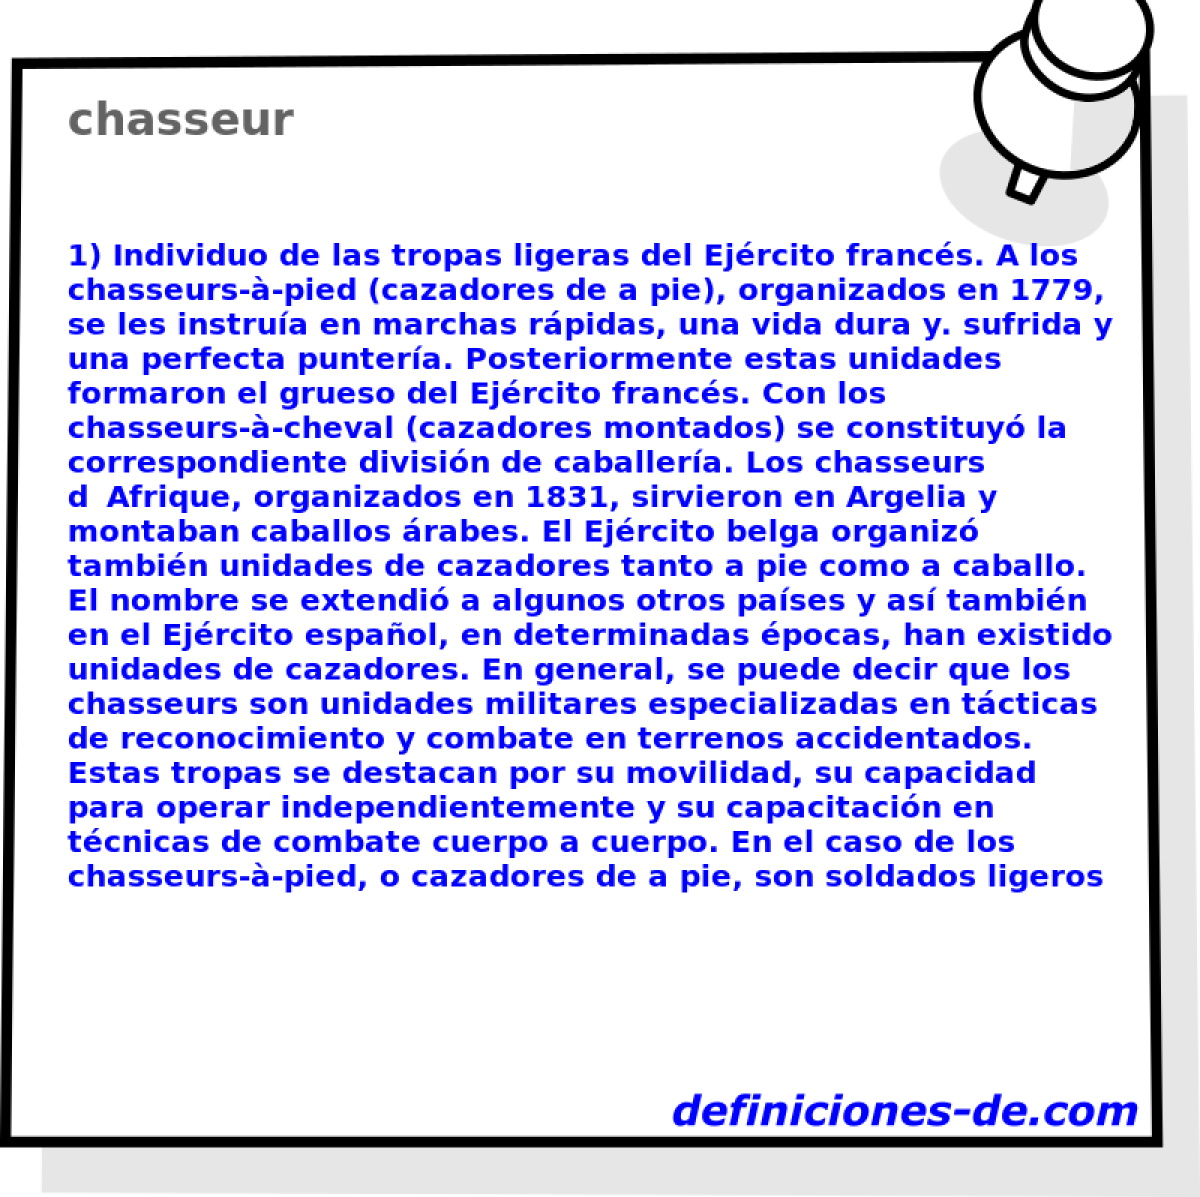 chasseur 